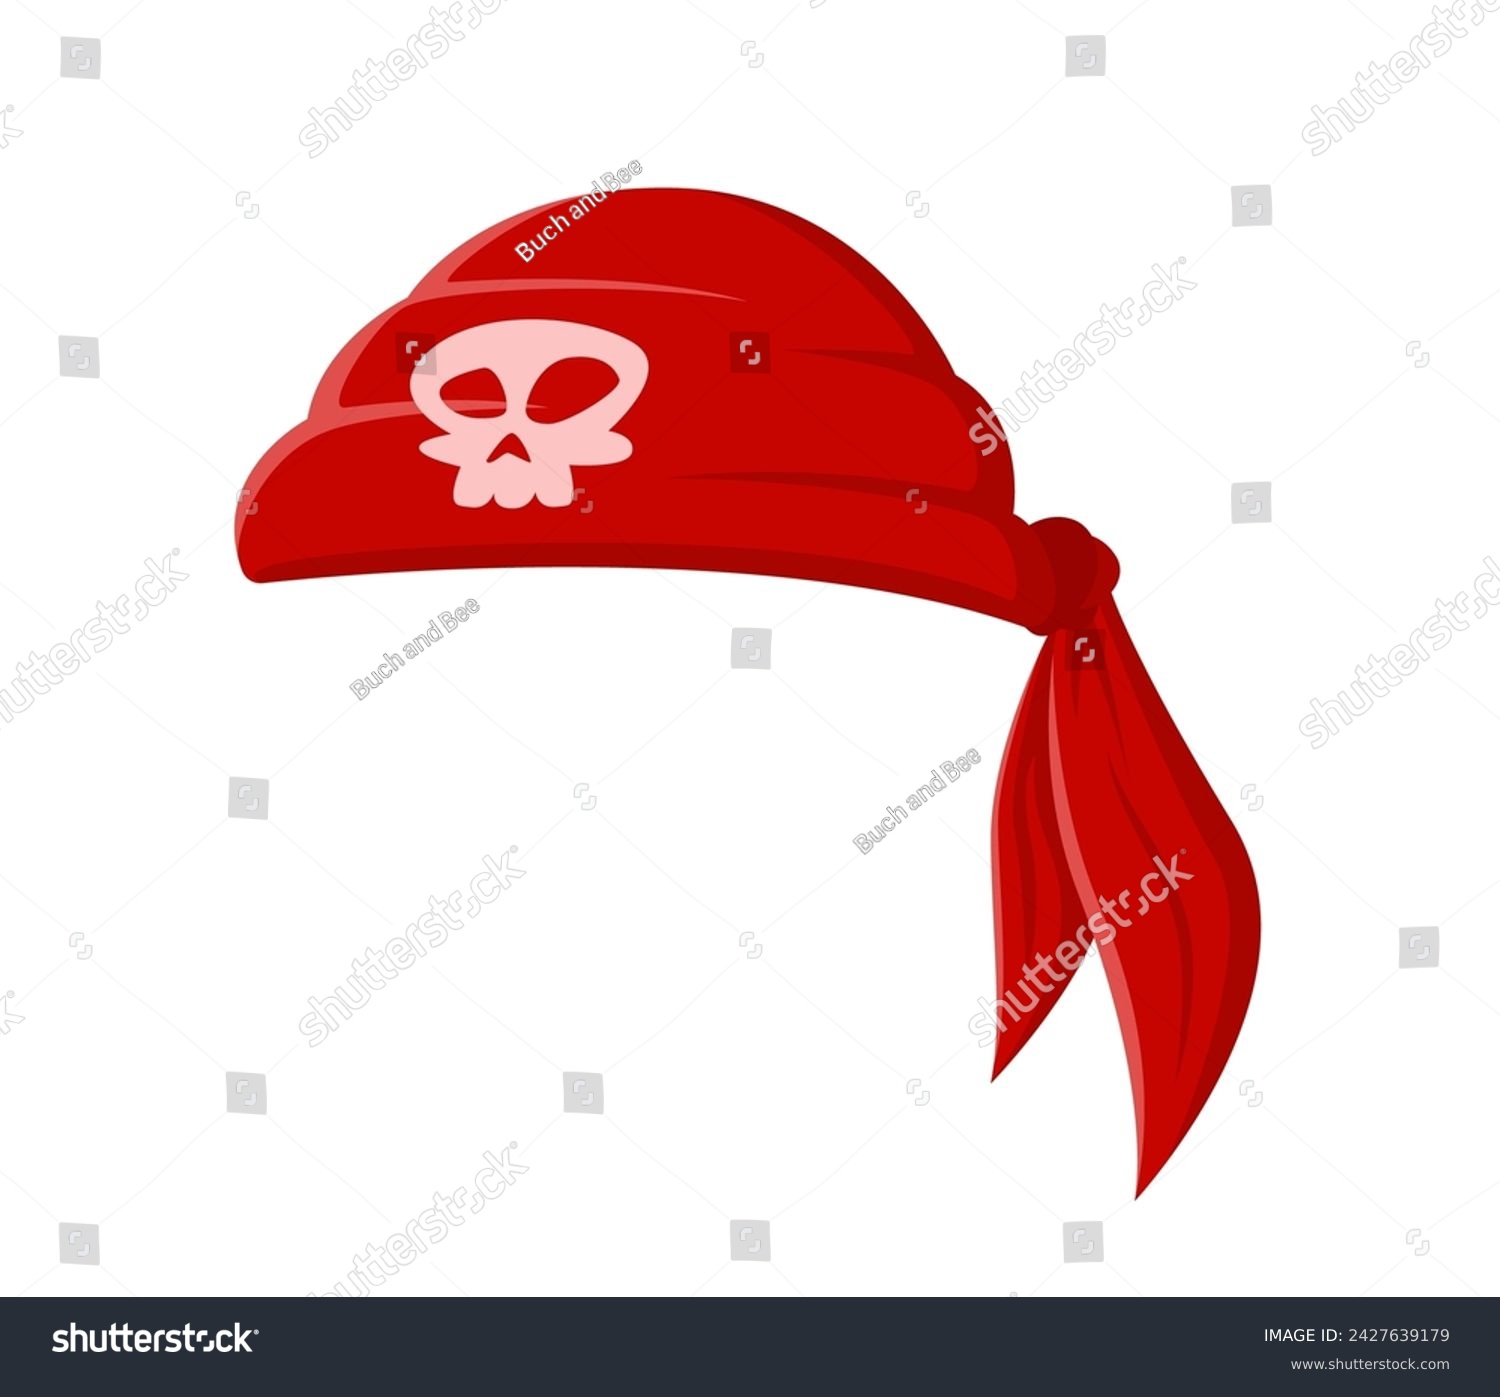 SVG of Cartoon sea pirate bandana, red corsair textile headwear with skull emblem. Isolated vector sailor head scarf, vintage rover handkerchief, filibuster costume signifies swashbuckling buccaneer spirit svg